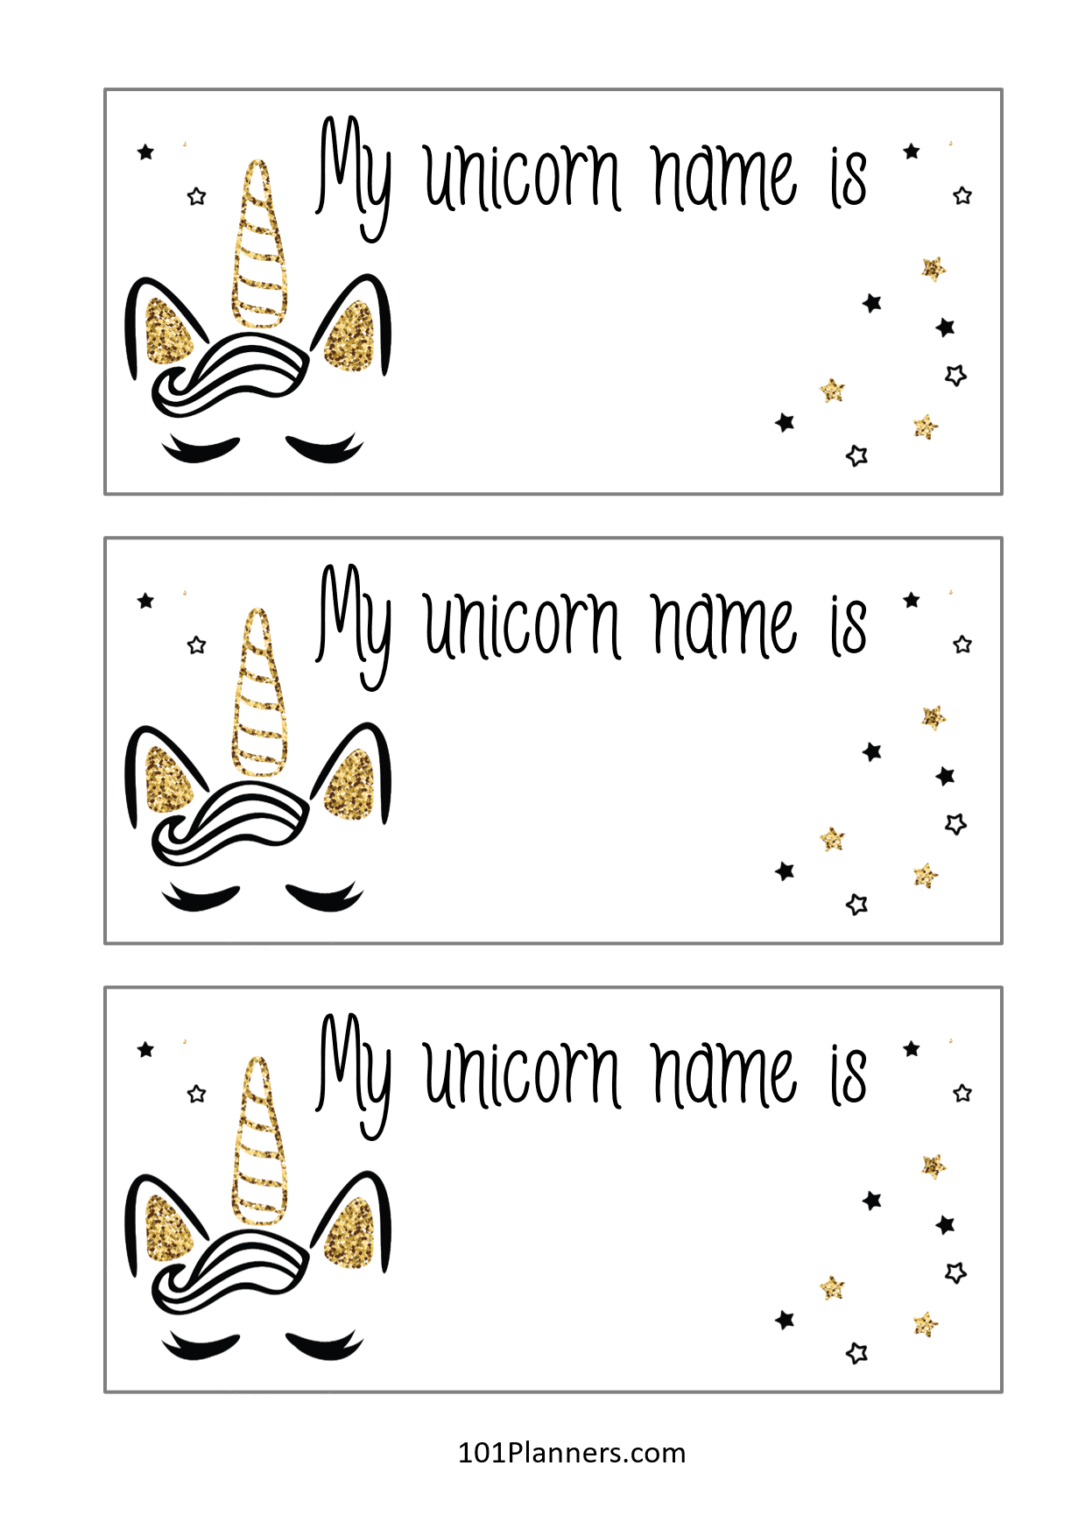 Whats Your Unicorn Name A Unique Name Generator Thats Fun To Use 8324